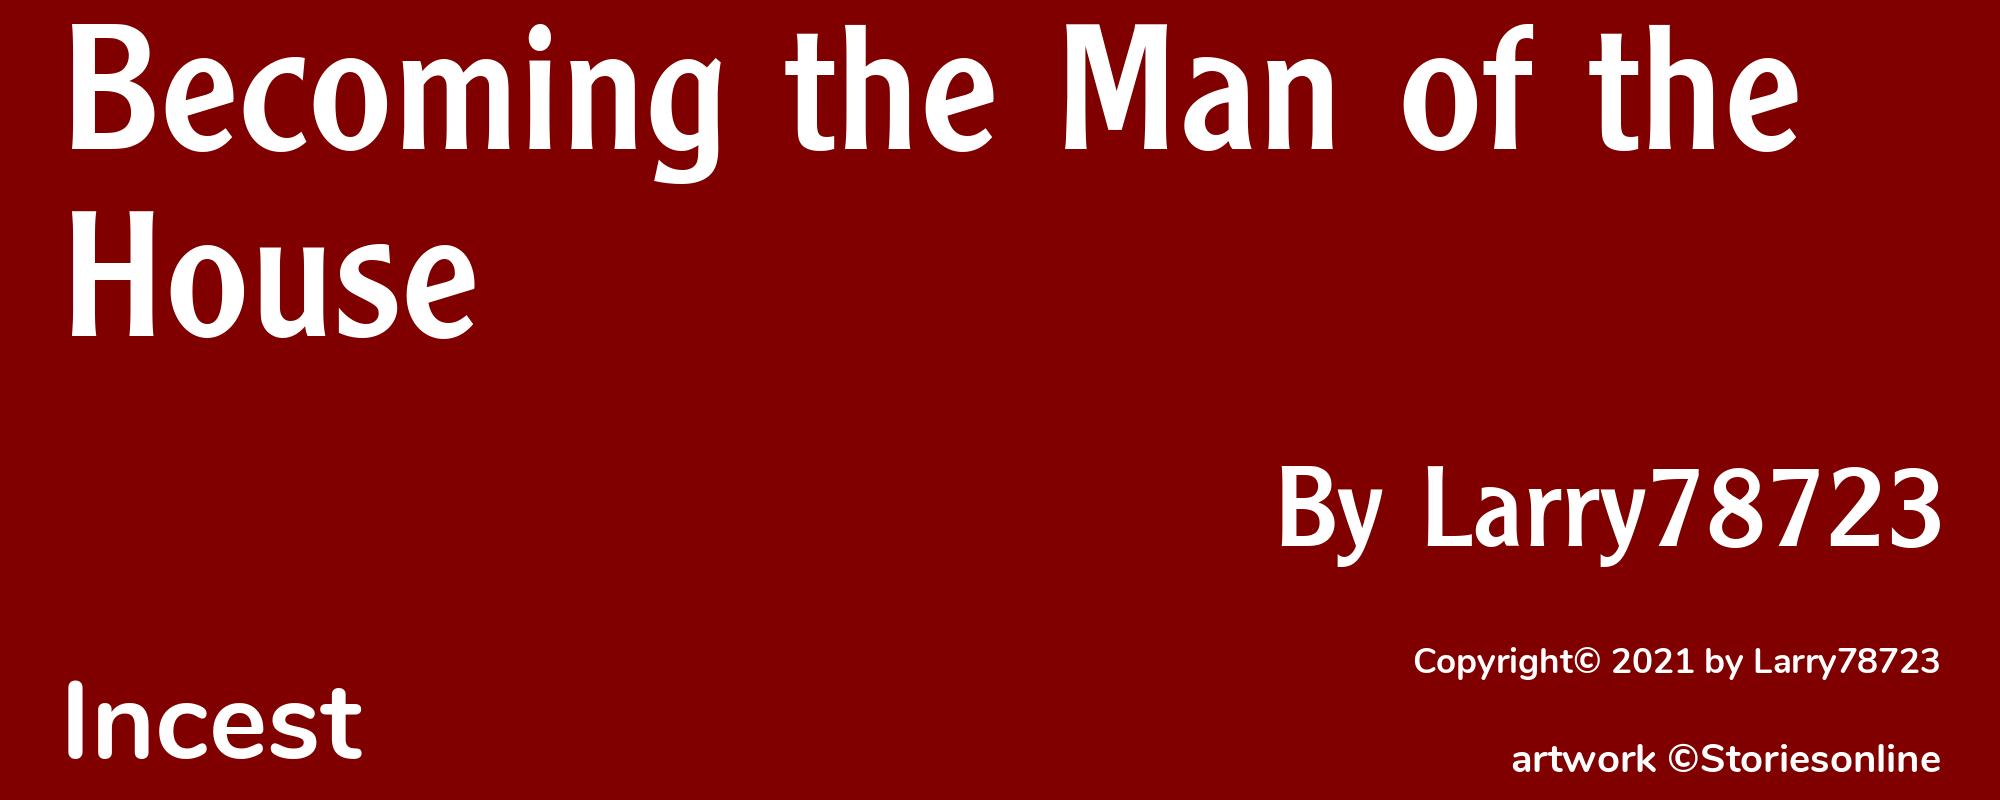 Becoming the Man of the House - Cover